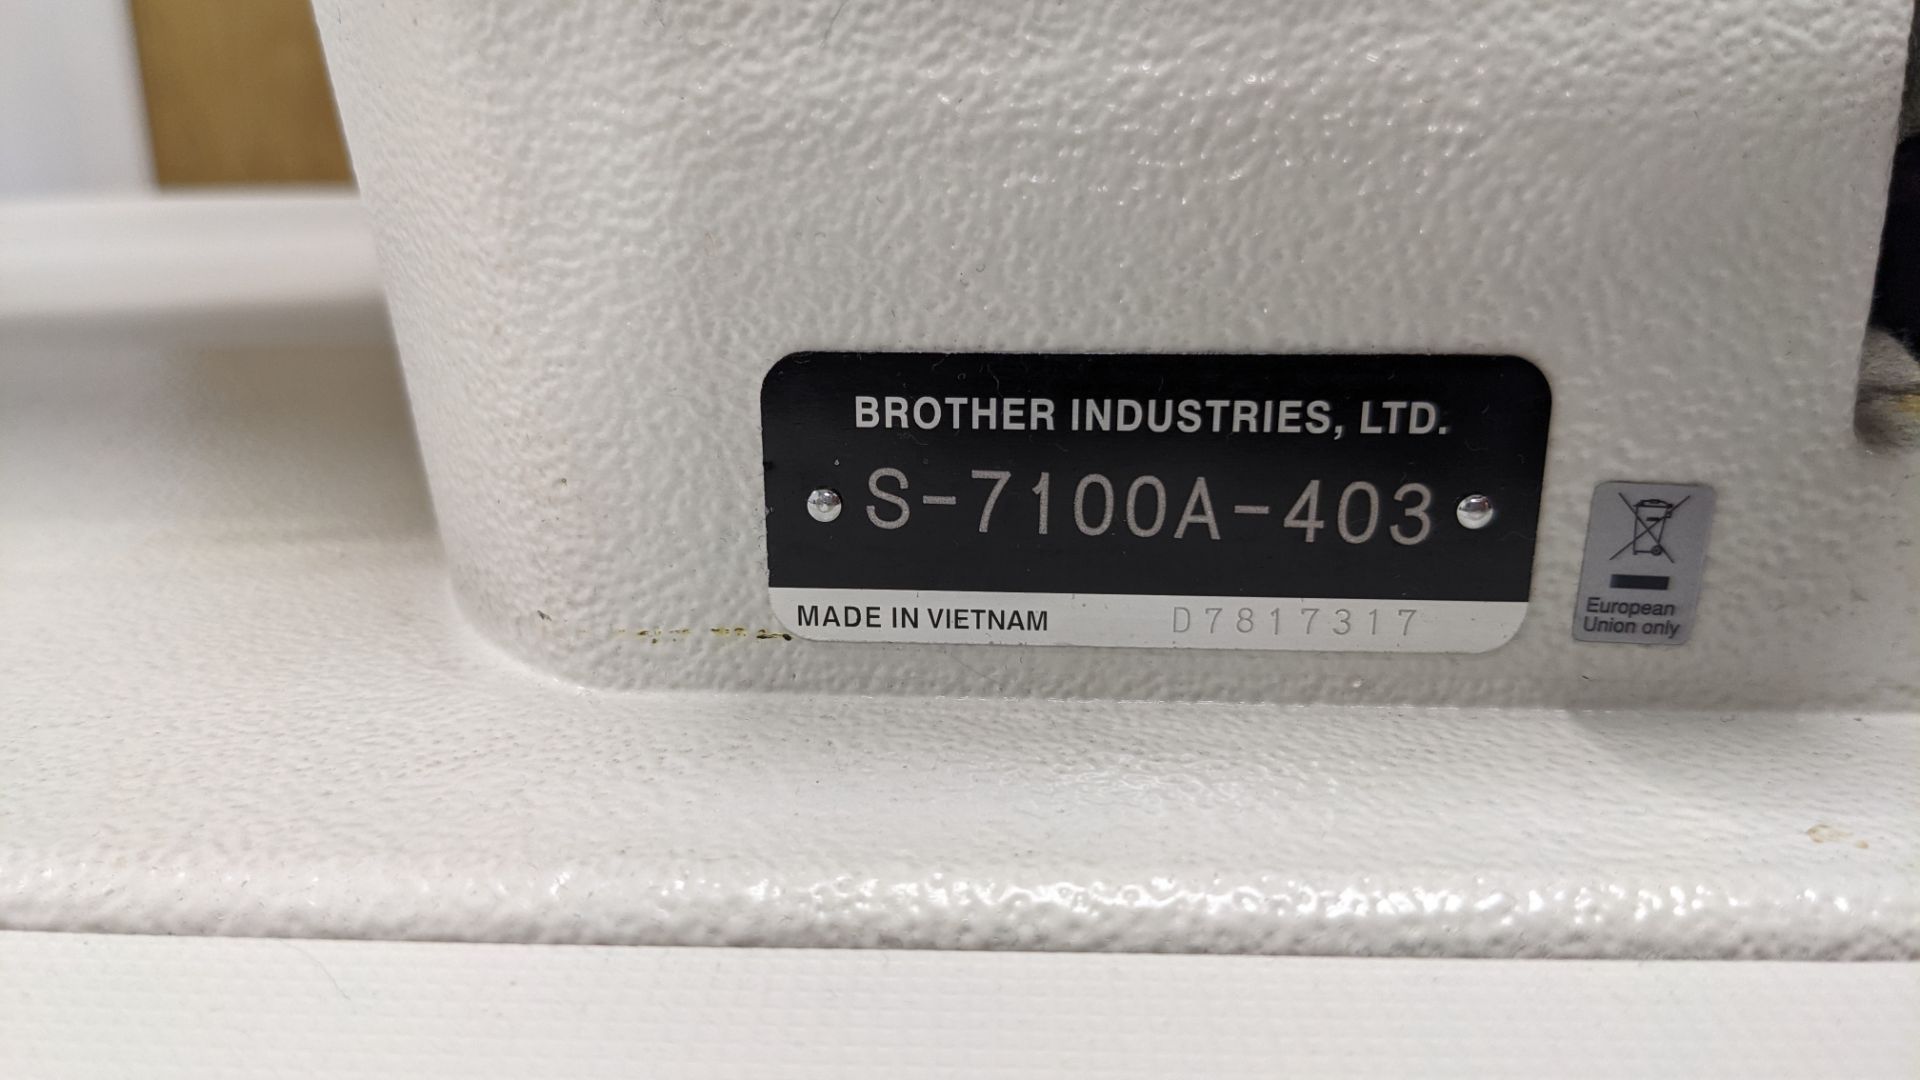 Brother S-7100A-403 Direct Drive (UBT) Lockstitch Straight Stitch Industrial Sewing Machine - Image 2 of 3